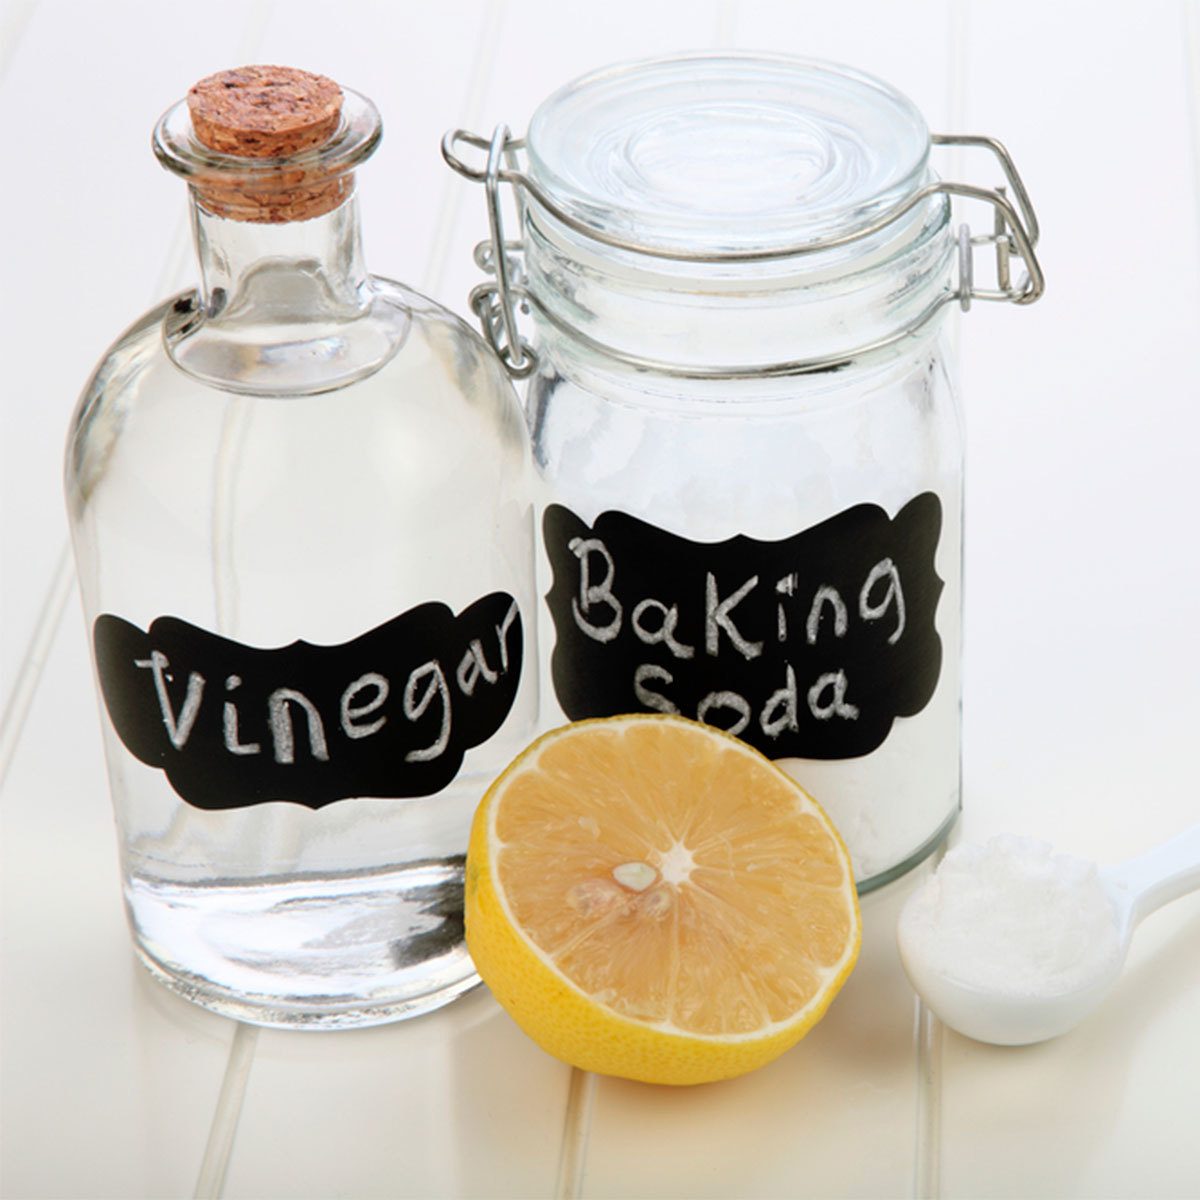 How to Make a Homemade Vinegar Cleaning Solution